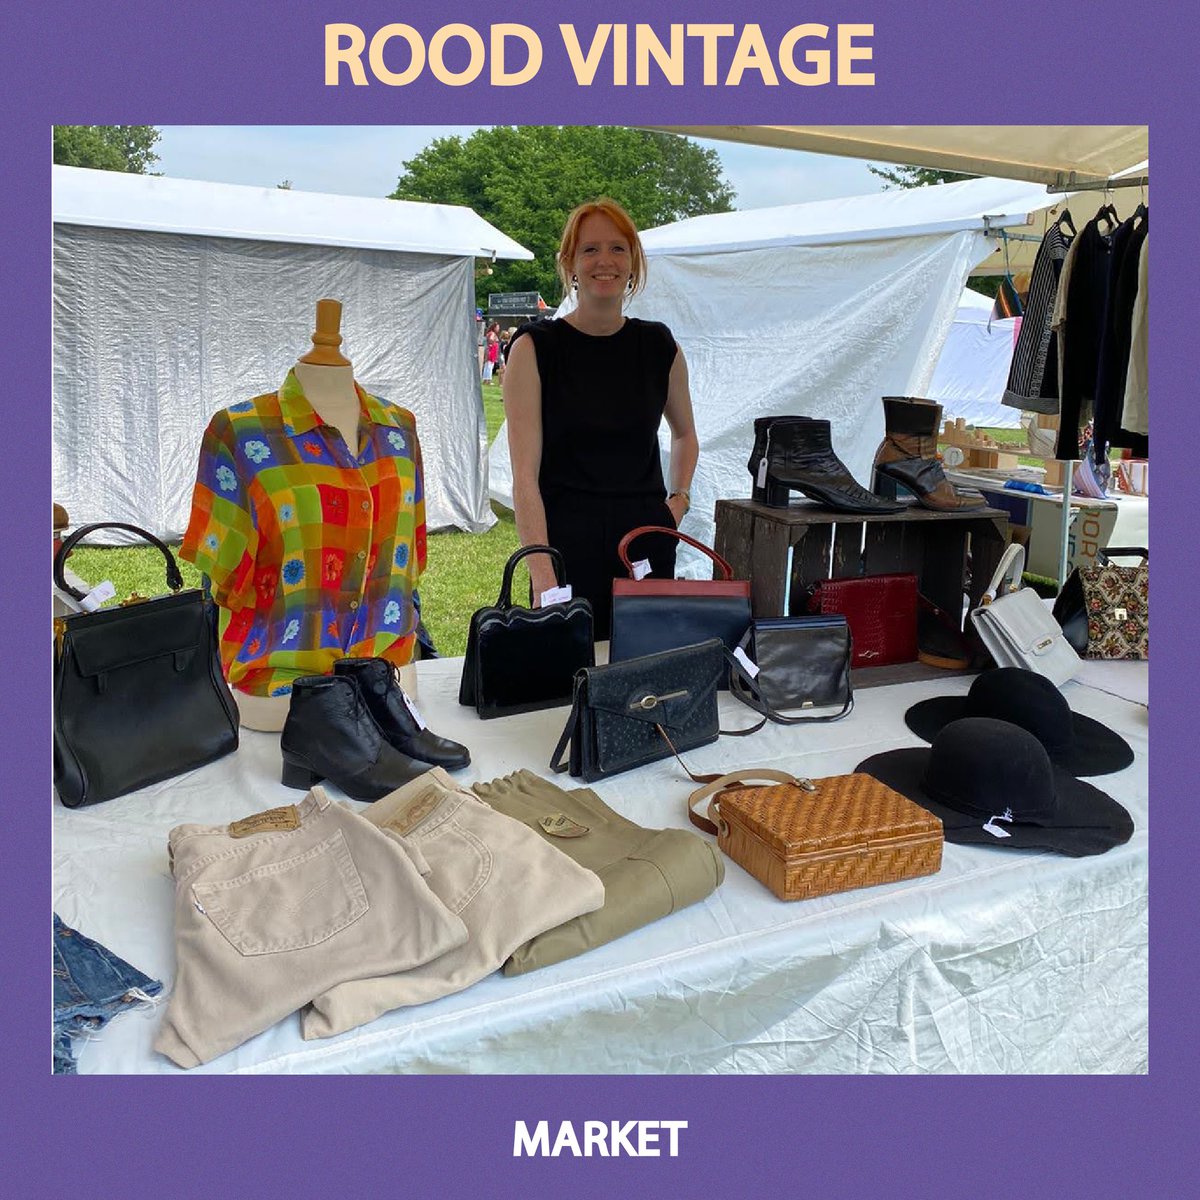 Introducing the first two stalls for our festival market - Continuum Vintage and Rood! Check them out on 9 October. Link in bio.